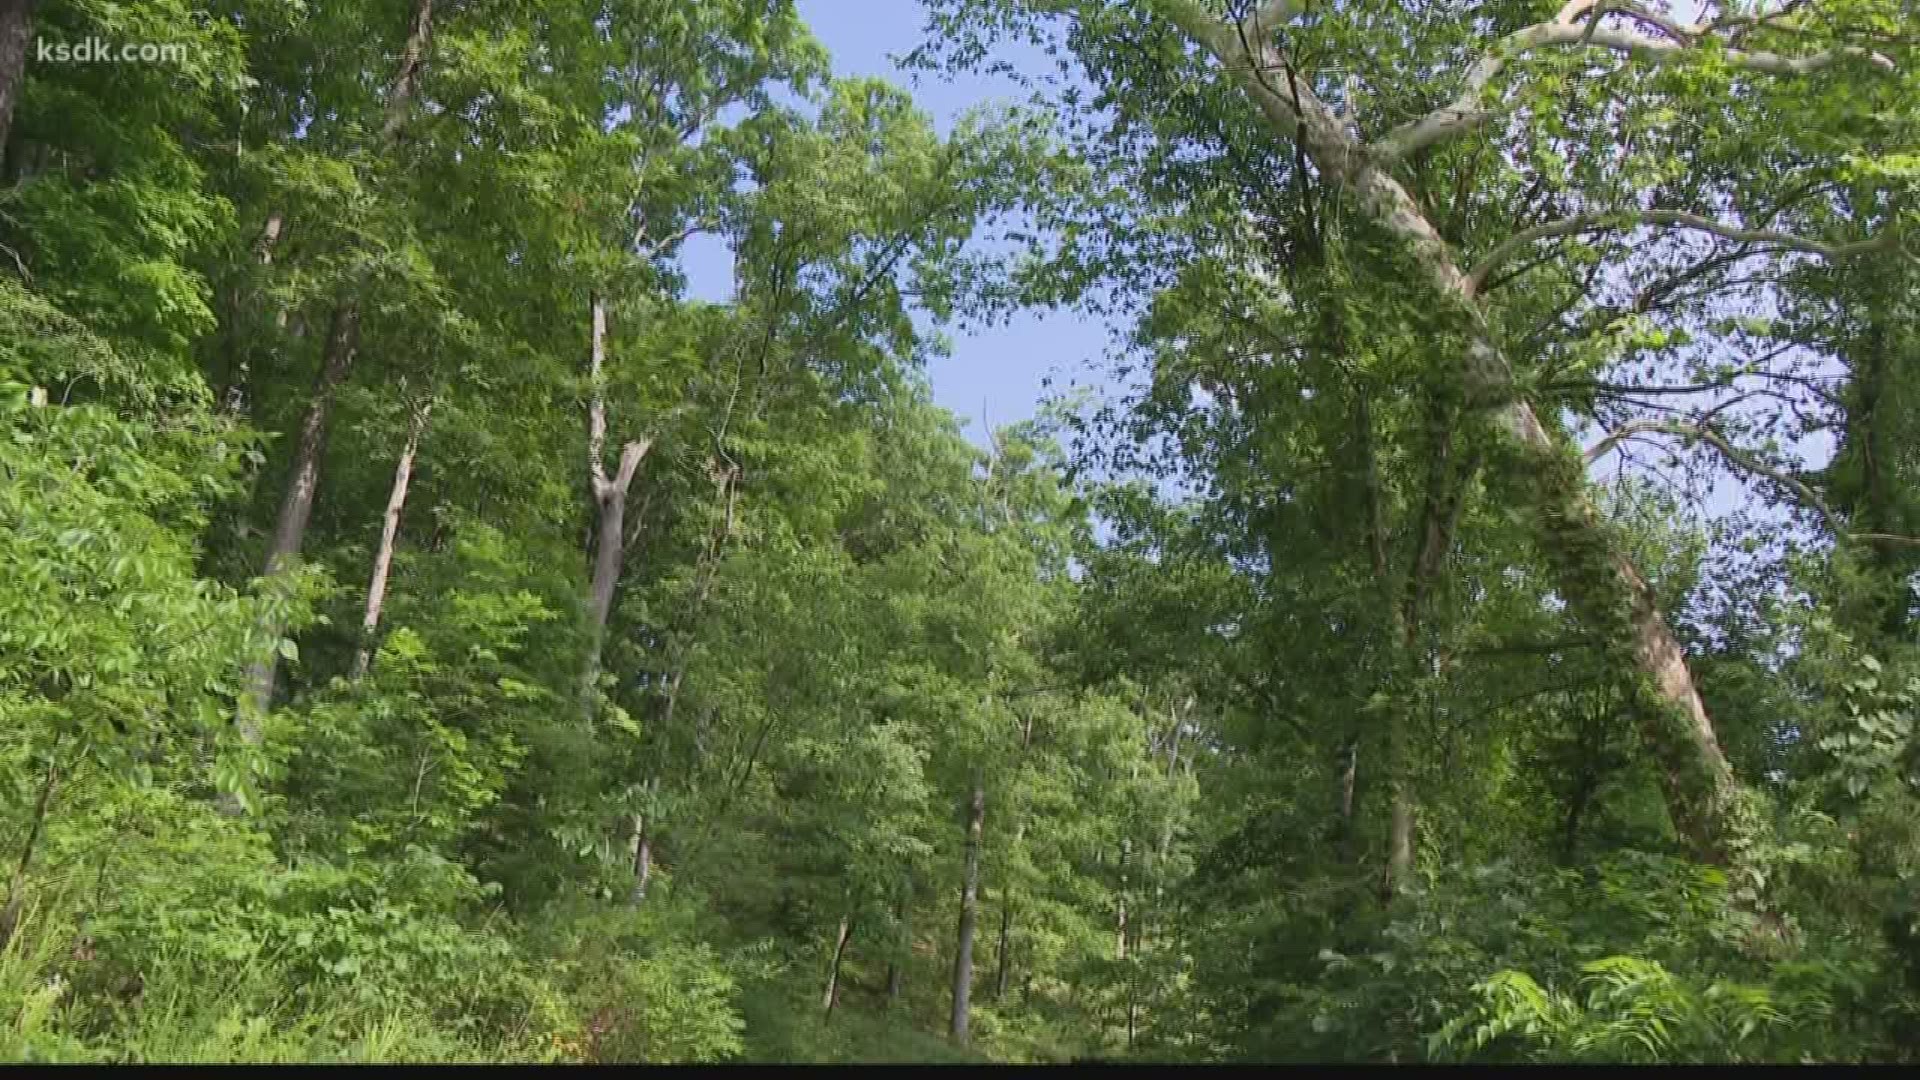 Profiting off of public land. People who live in St. Charles County are accusing the University of Missouri of doing just that, tearing down nature near the Katy Trail to put up a new neighborhood.